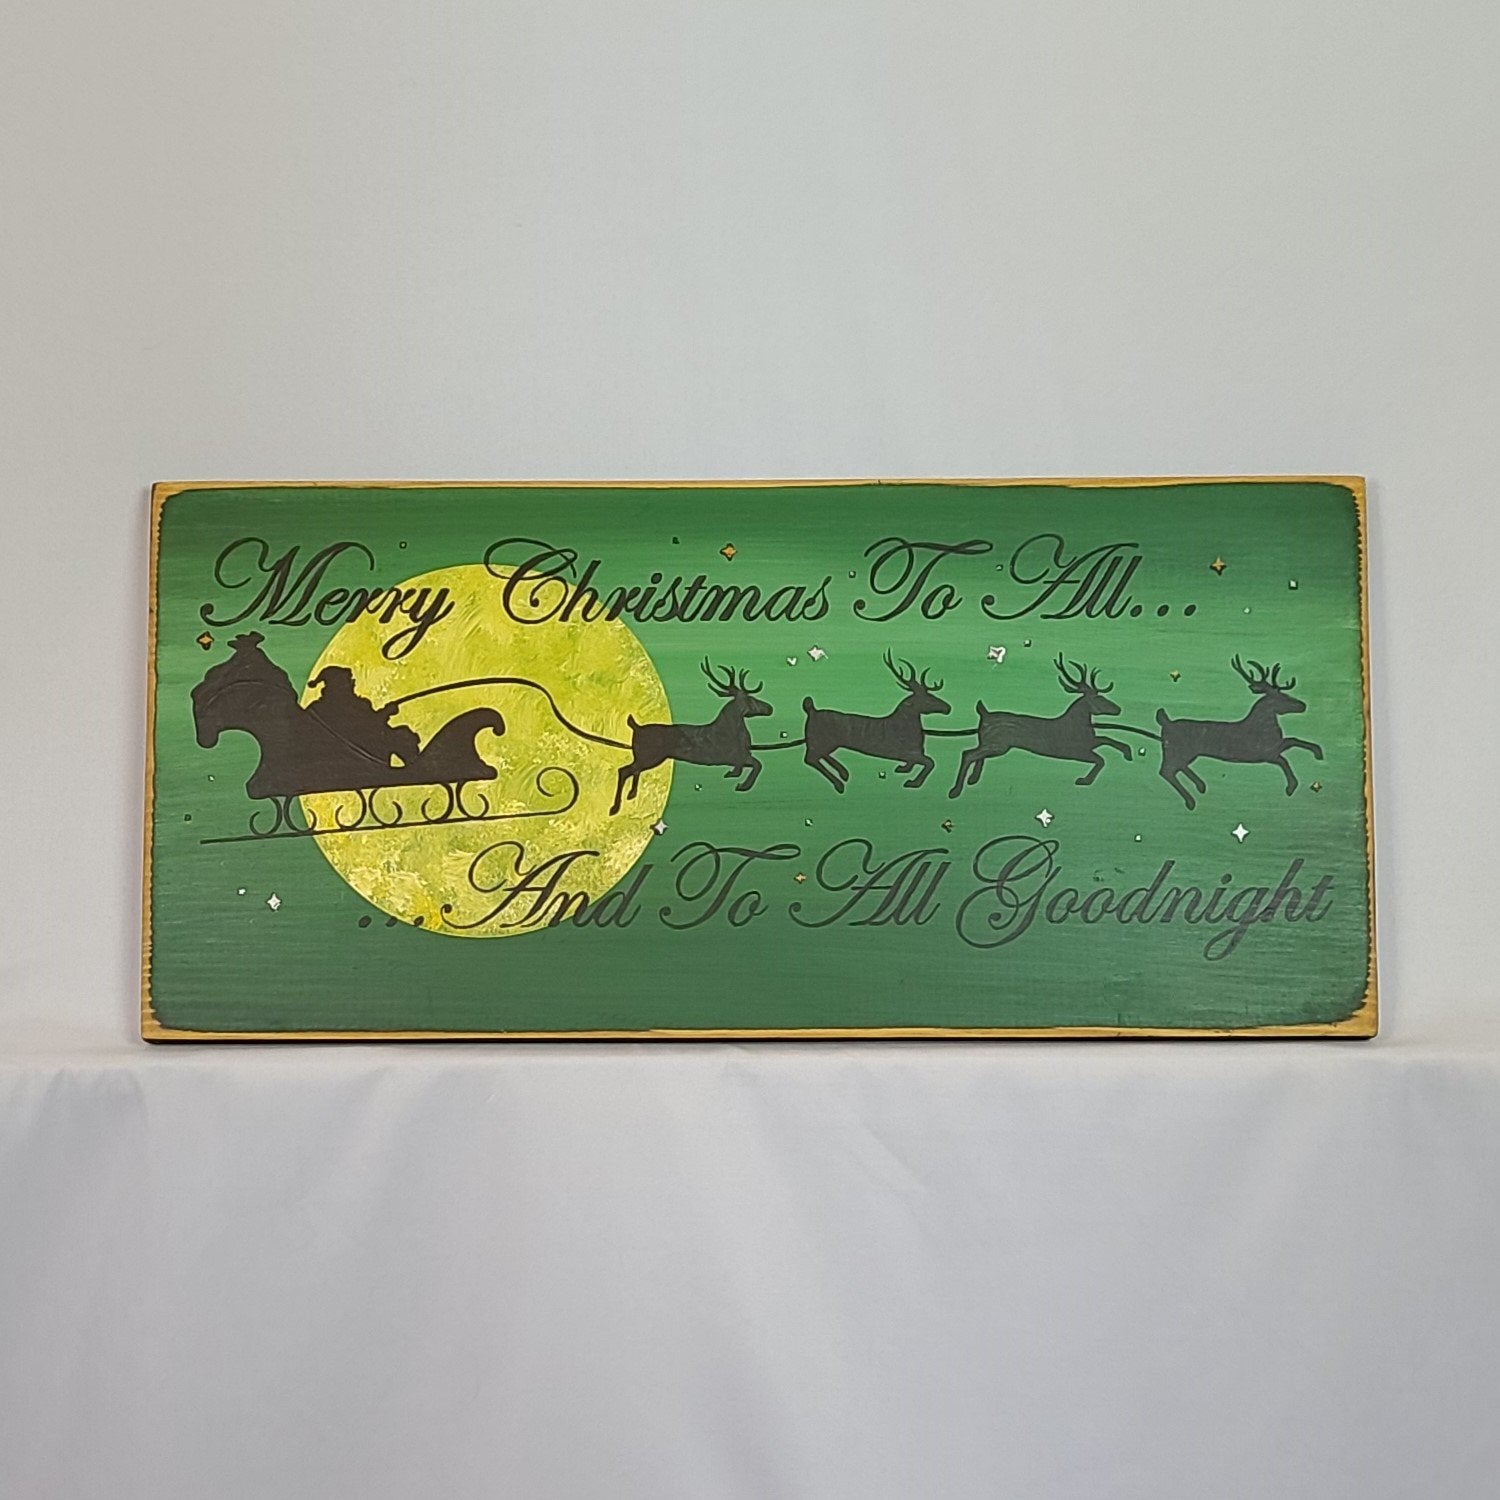 Merry Christmas Santa's Sleigh To All A Goodnight Wooden Sign